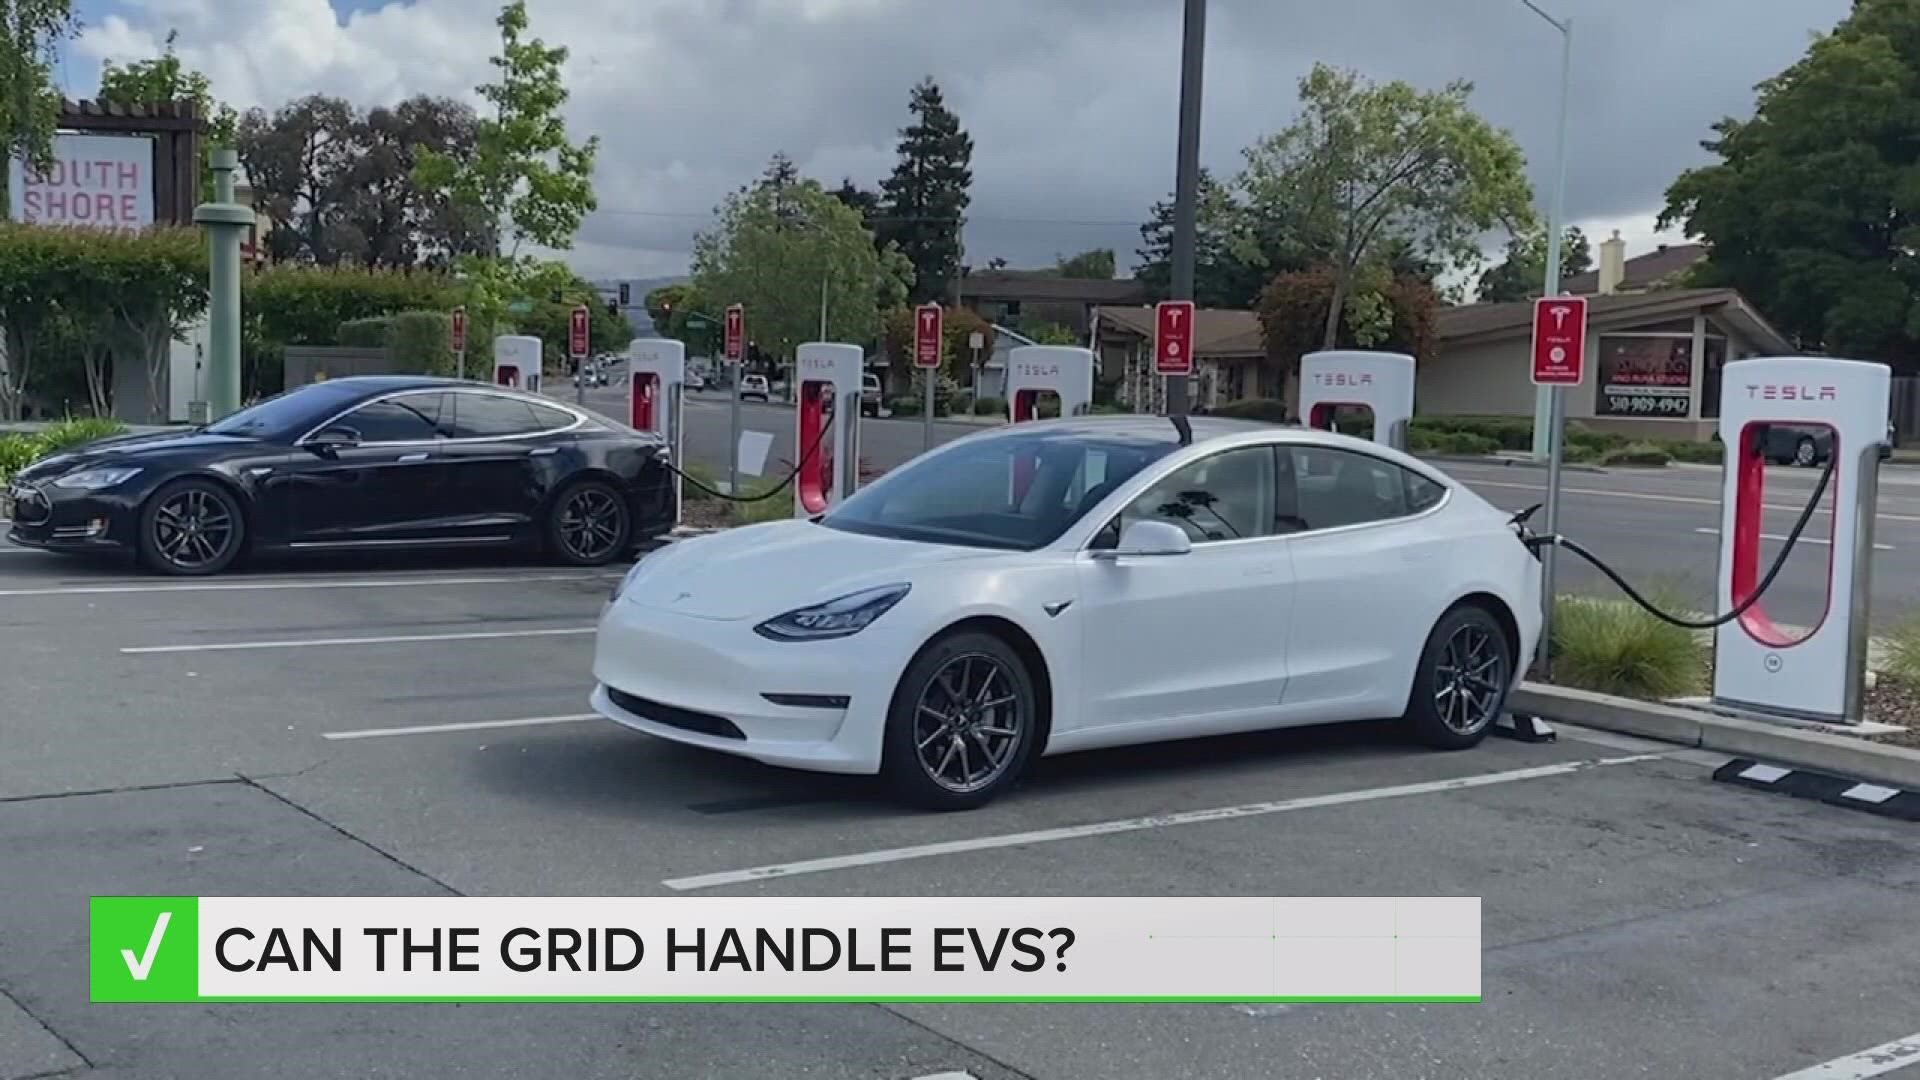 Can the power grid handle more EVs?